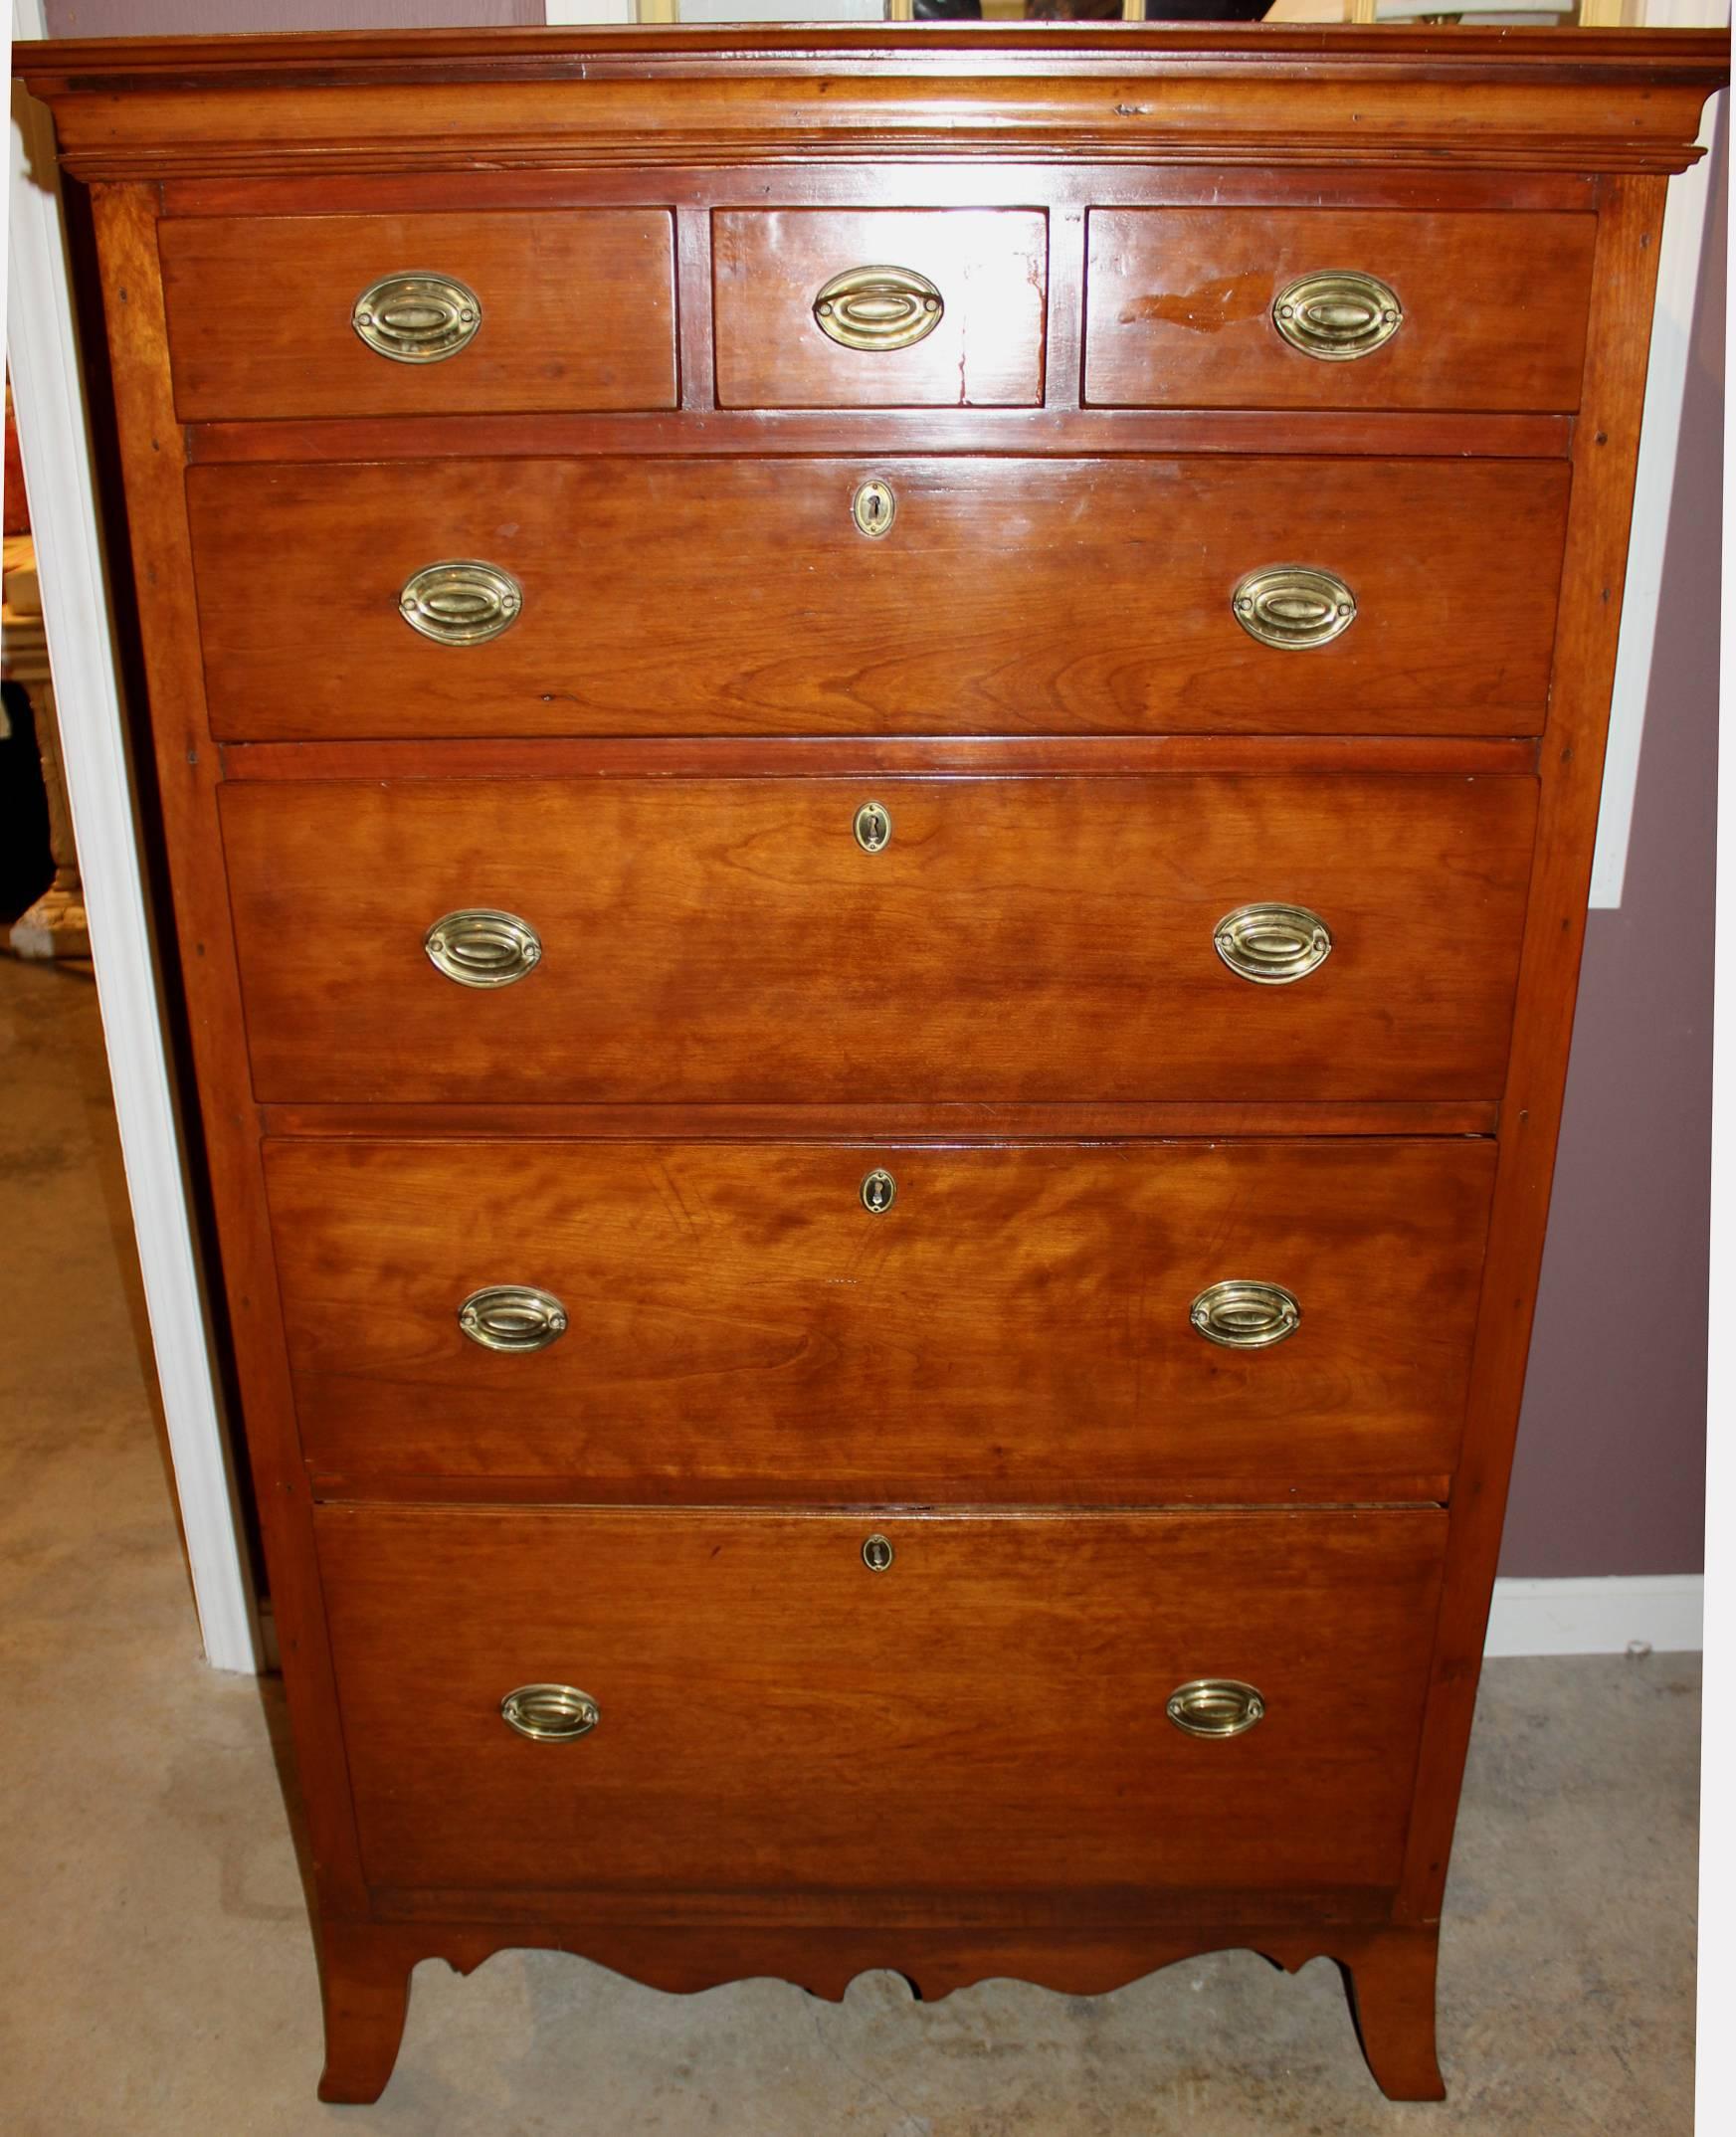 A wonderful example of a late 18th early 19th century transitional Pennsylvania three over four tall chest with great proportions, with graduated drawers, oval brass pulls, supported by French splayed feet. The top three fitted drawers were